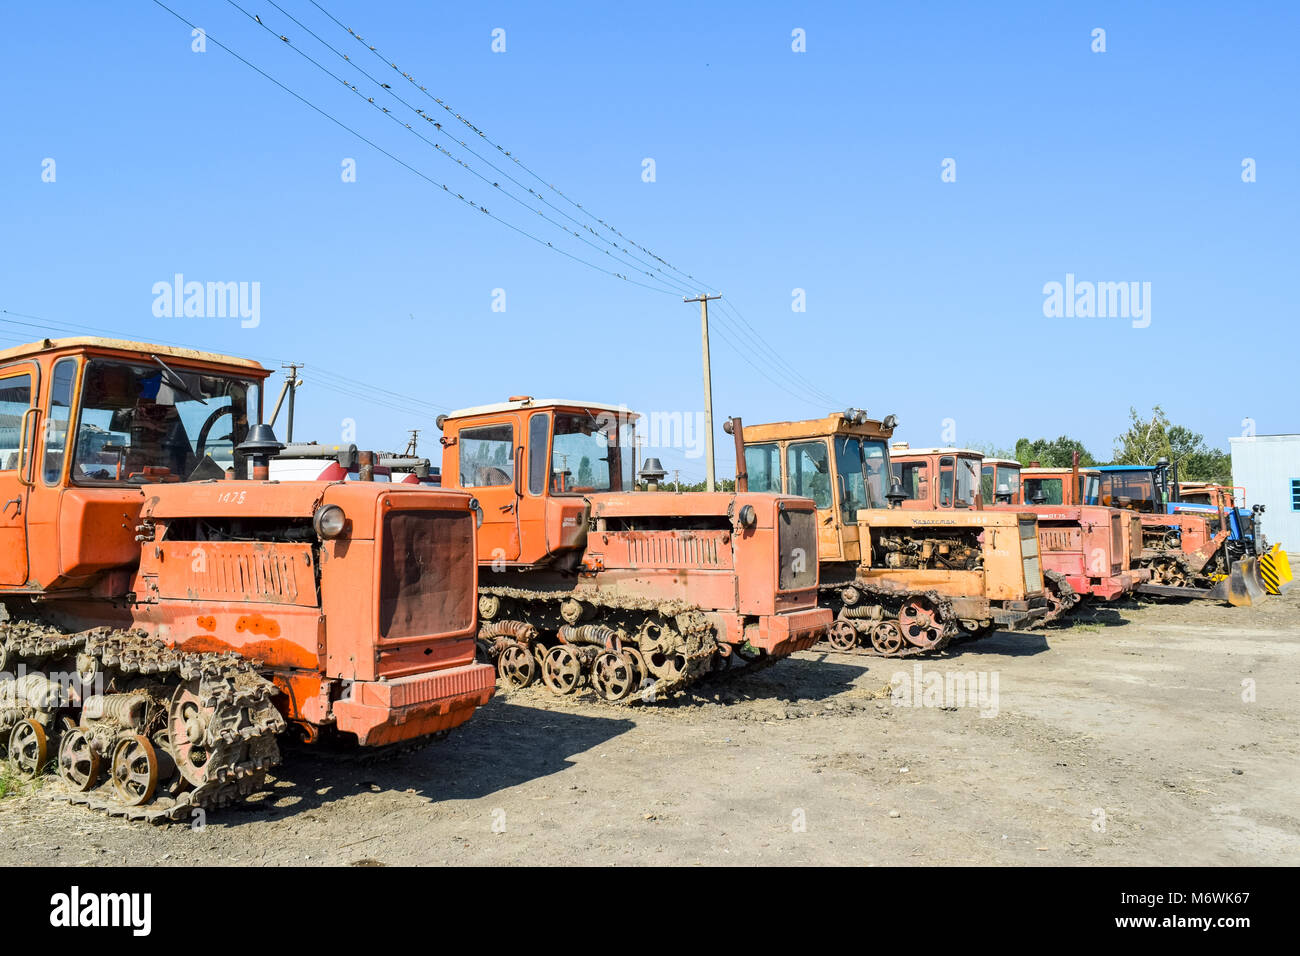 Russia, Temryuk - 15 July 2015: Tractor. Agricultural machinery tractor. Parking of tractor agricultural machinery. The picture was taken at a parking Stock Photo